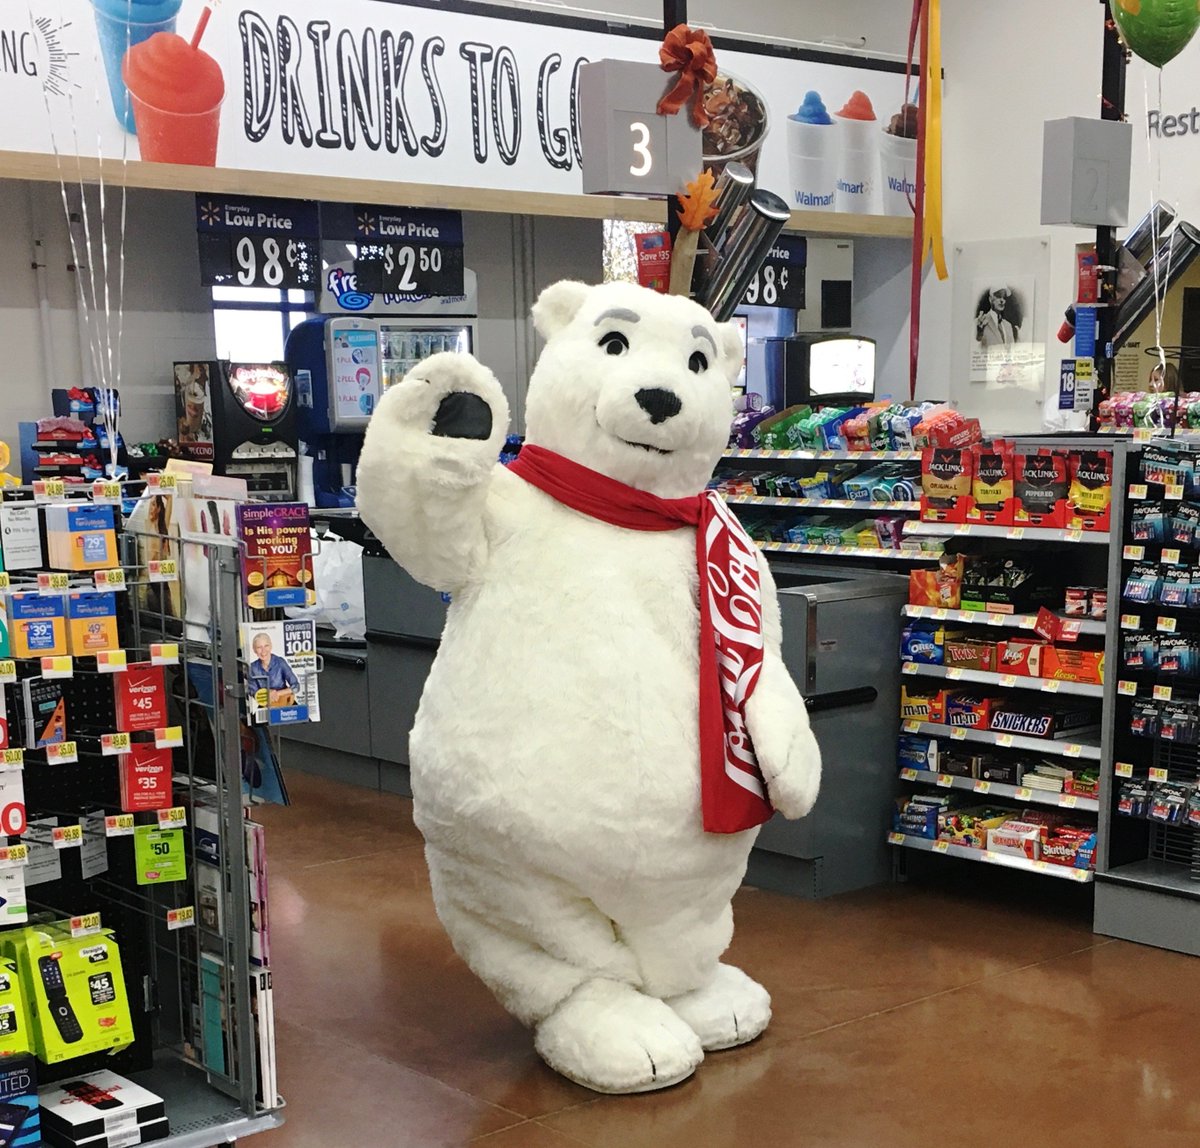 If you are planning your weekly grocery shopping trip, make a point to visit the Walmart on E. Kearney in Springfield on Wednesday from 9-11am. If you do, you will get the chance to meet our lovable Polar Bear, BUBBLES!